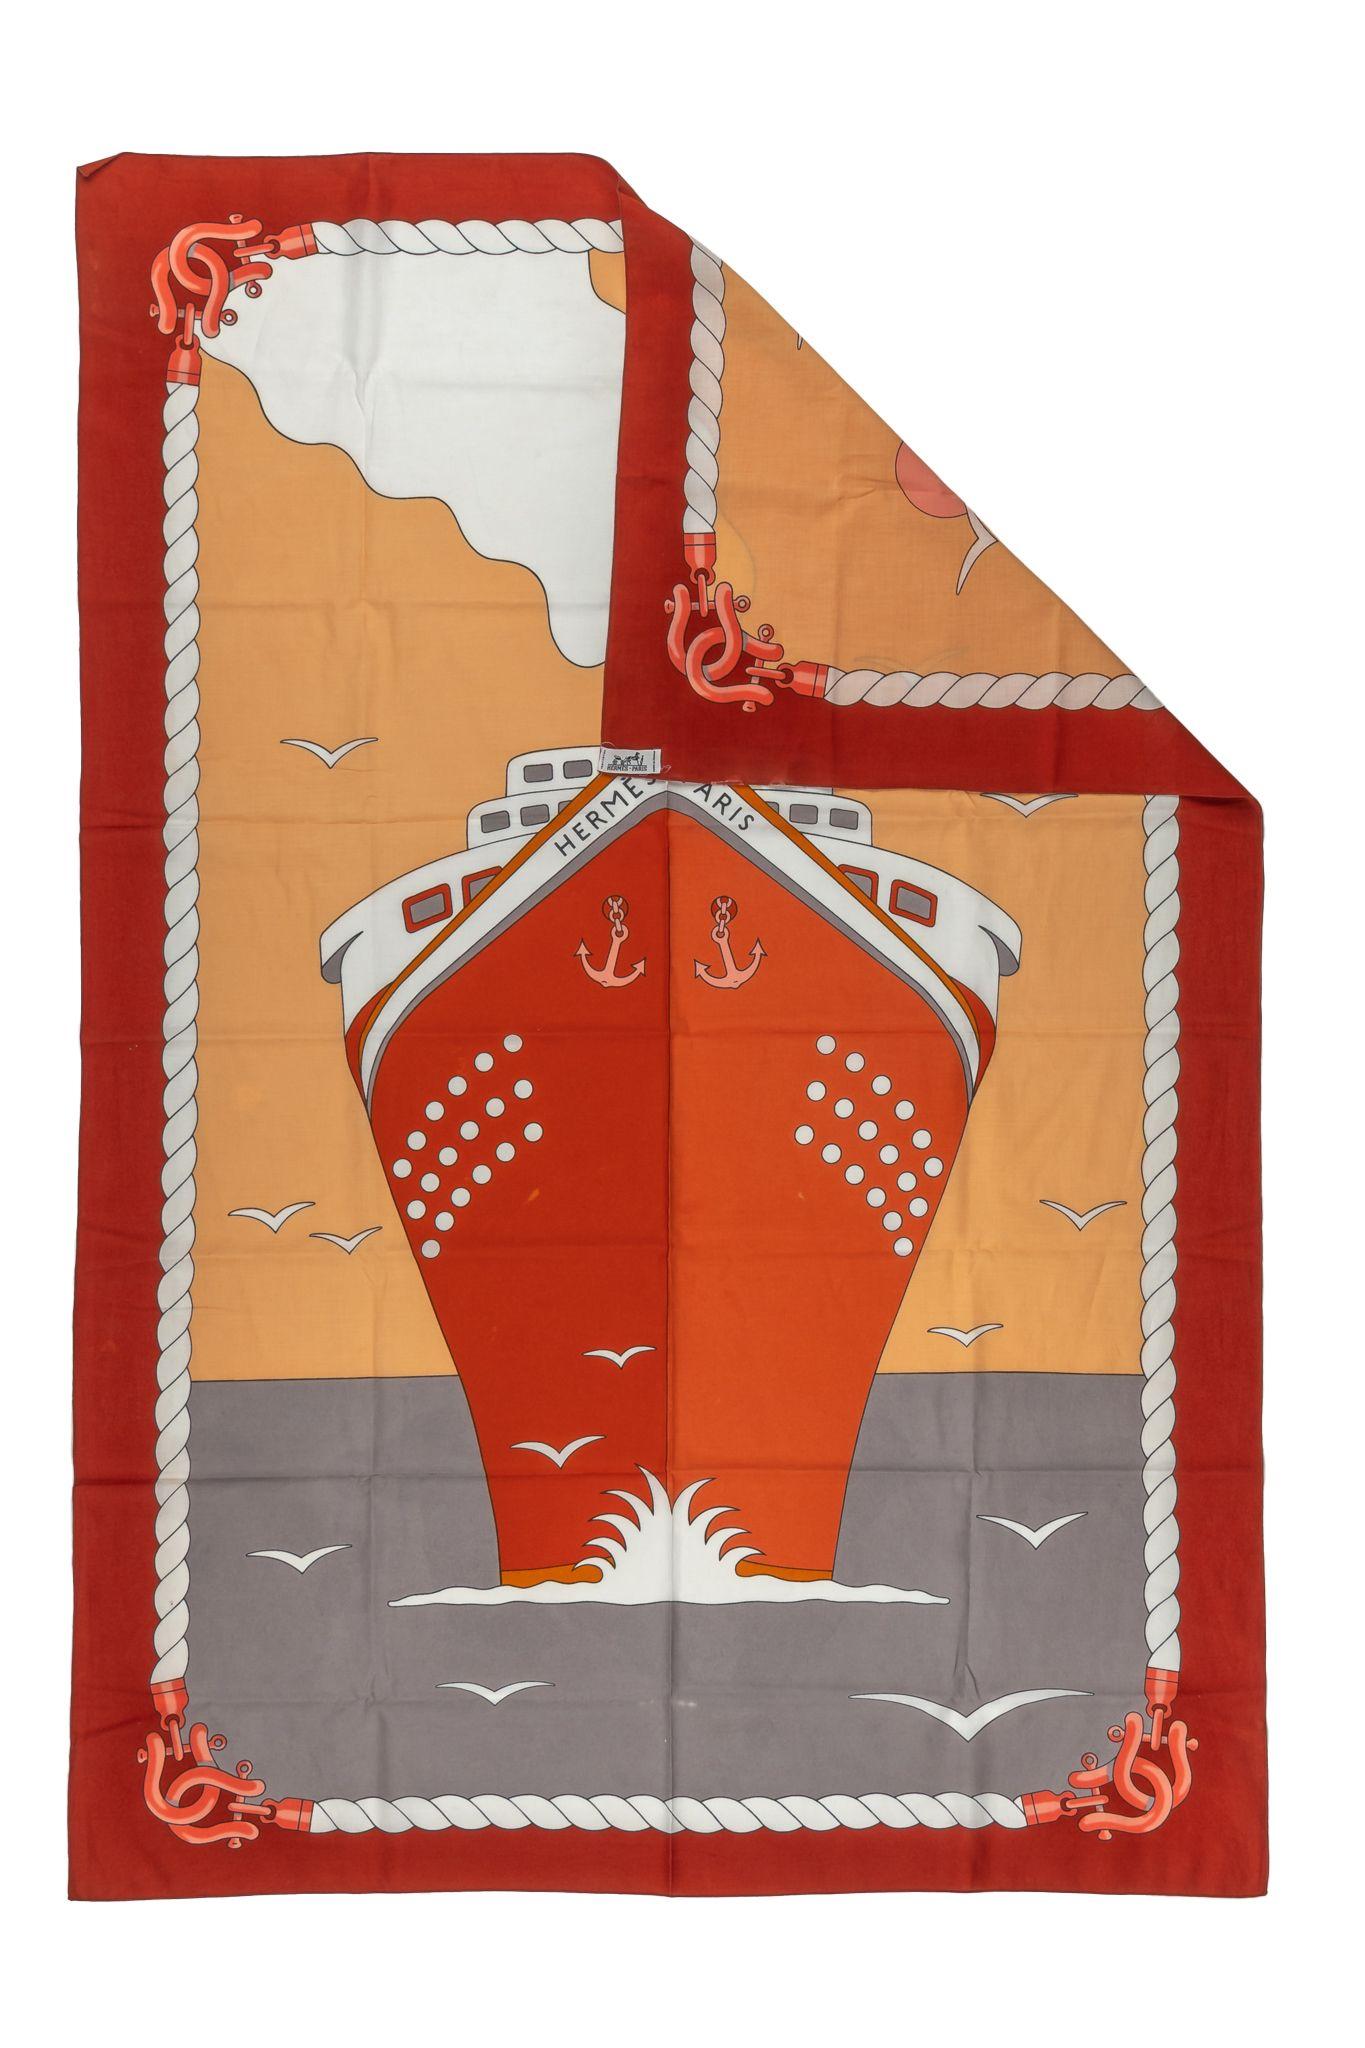 Hermès Drop de Plage Cruise Ship beach sarong. Go in style on your next swim, boat trip or use as an essential staple in your guest house.
Please note, spots, please refer to photos and comes without box.